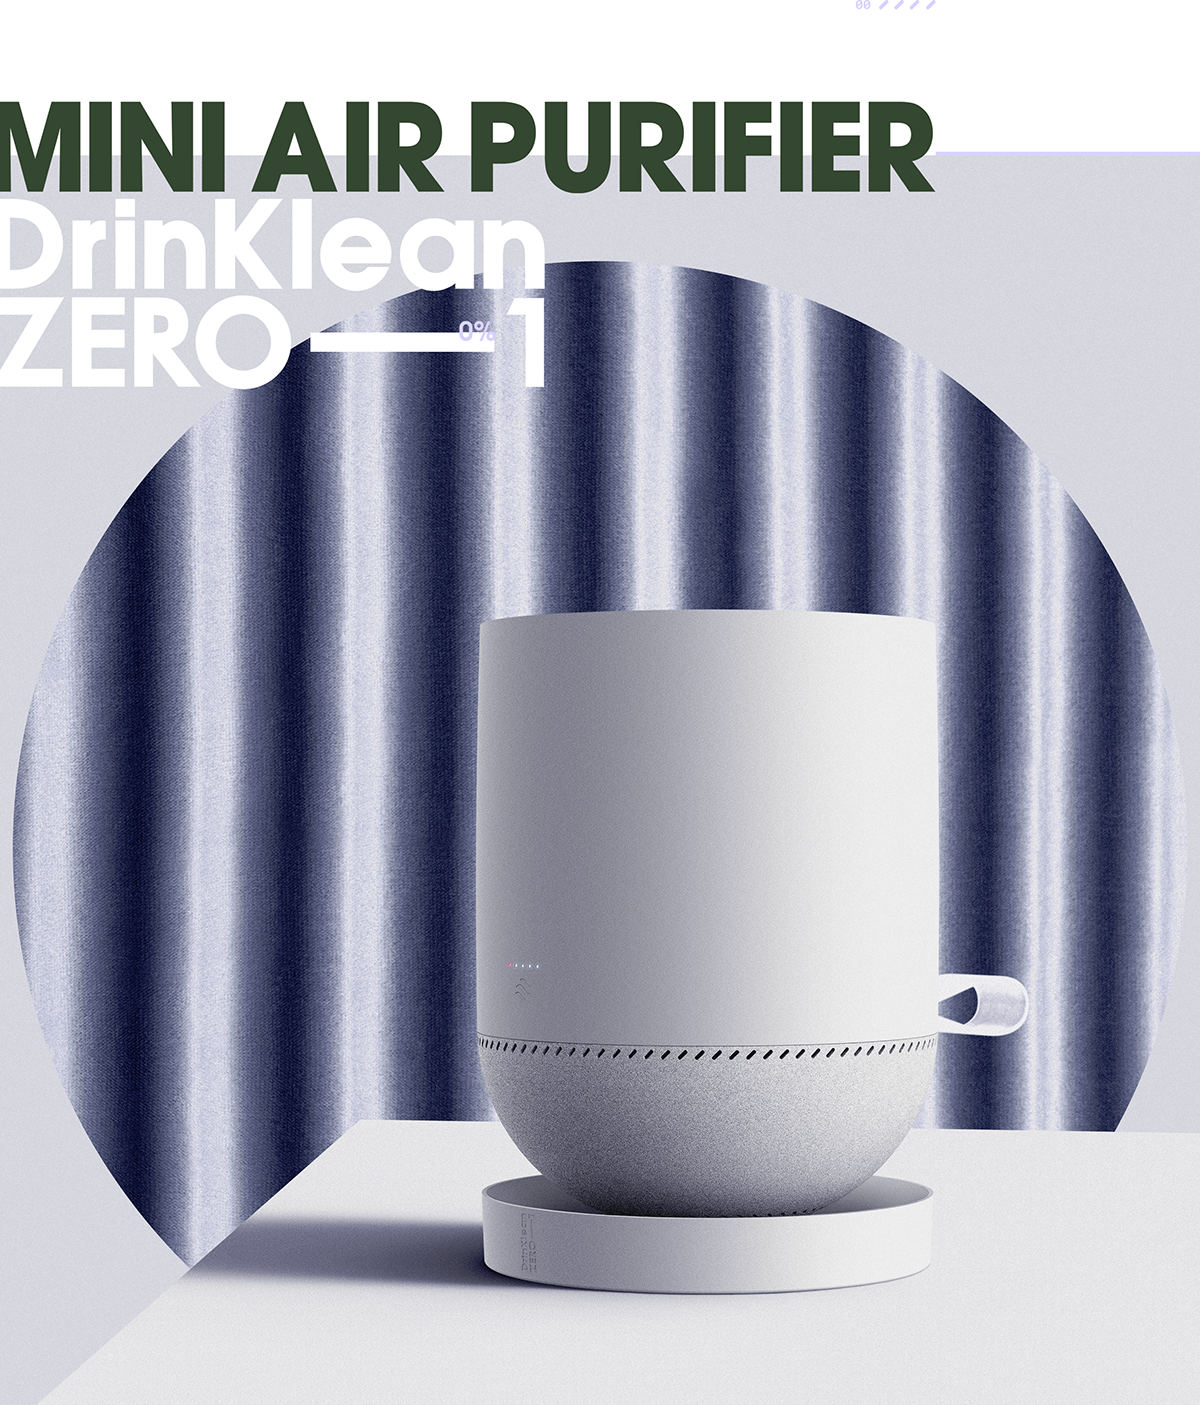 air purifier product clean minimal cleaner tumbler cup Stand appliances